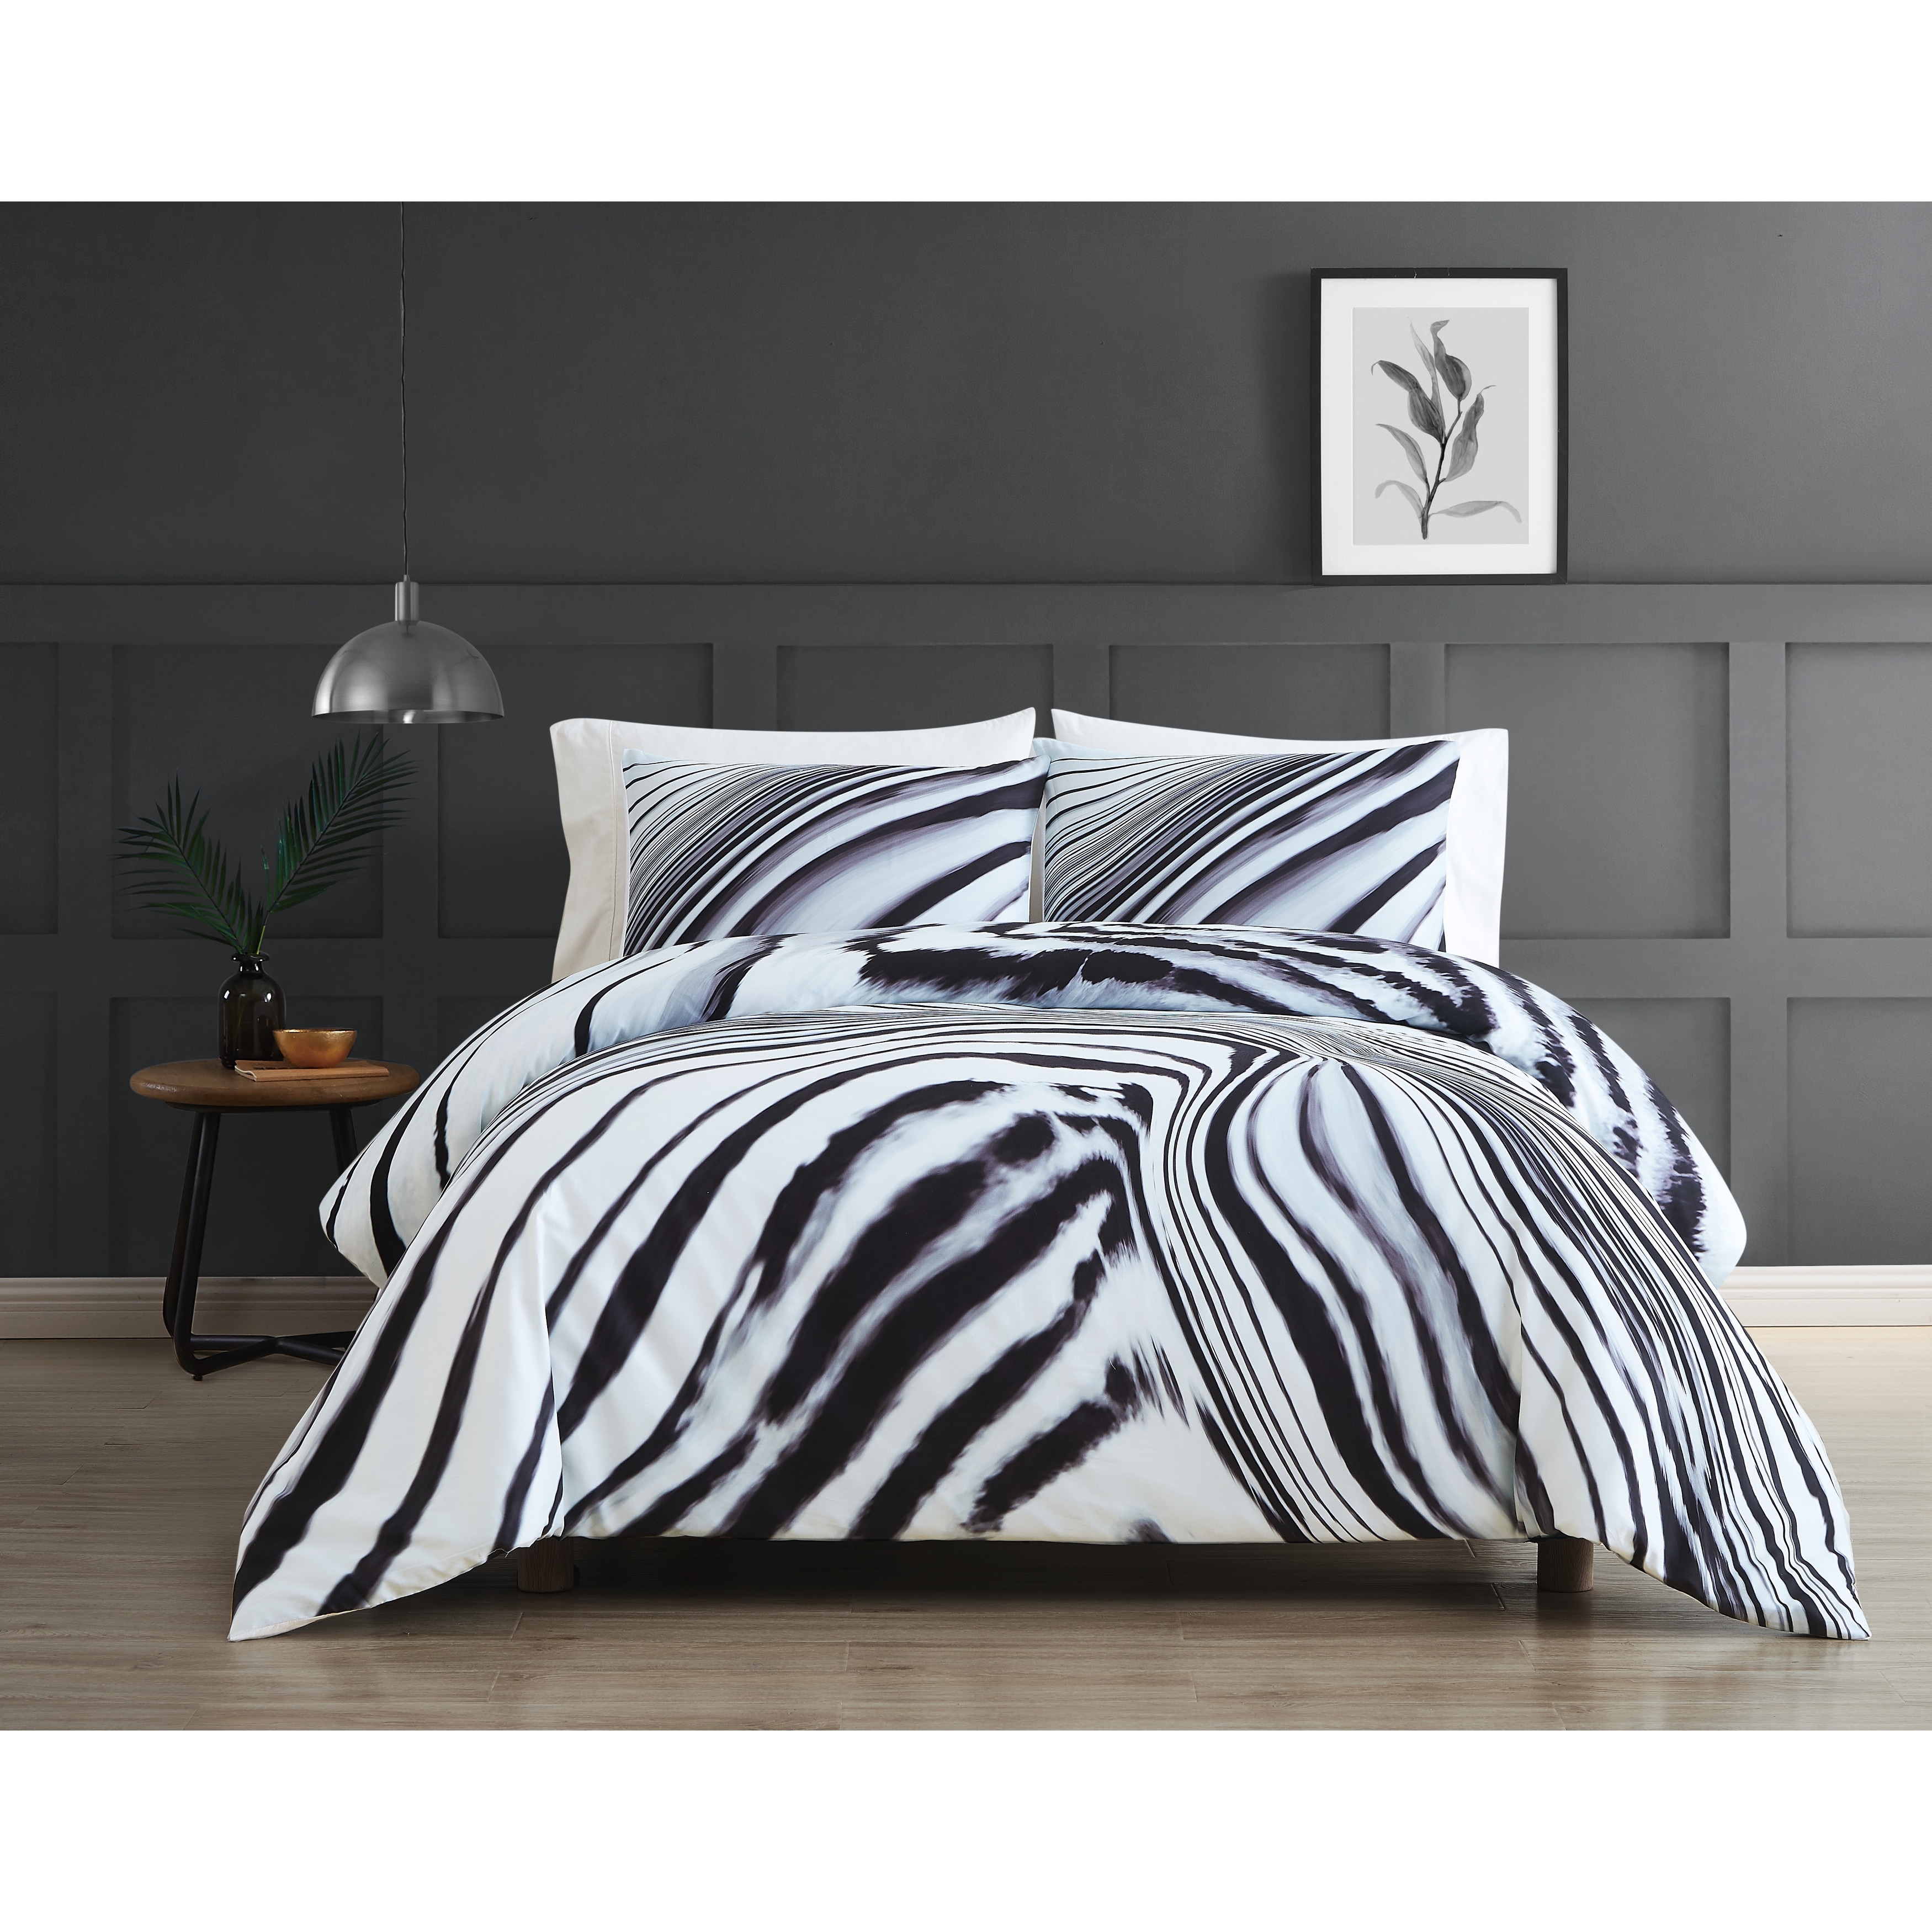 Vince Camuto Comforters and Sets - Bed Bath & Beyond